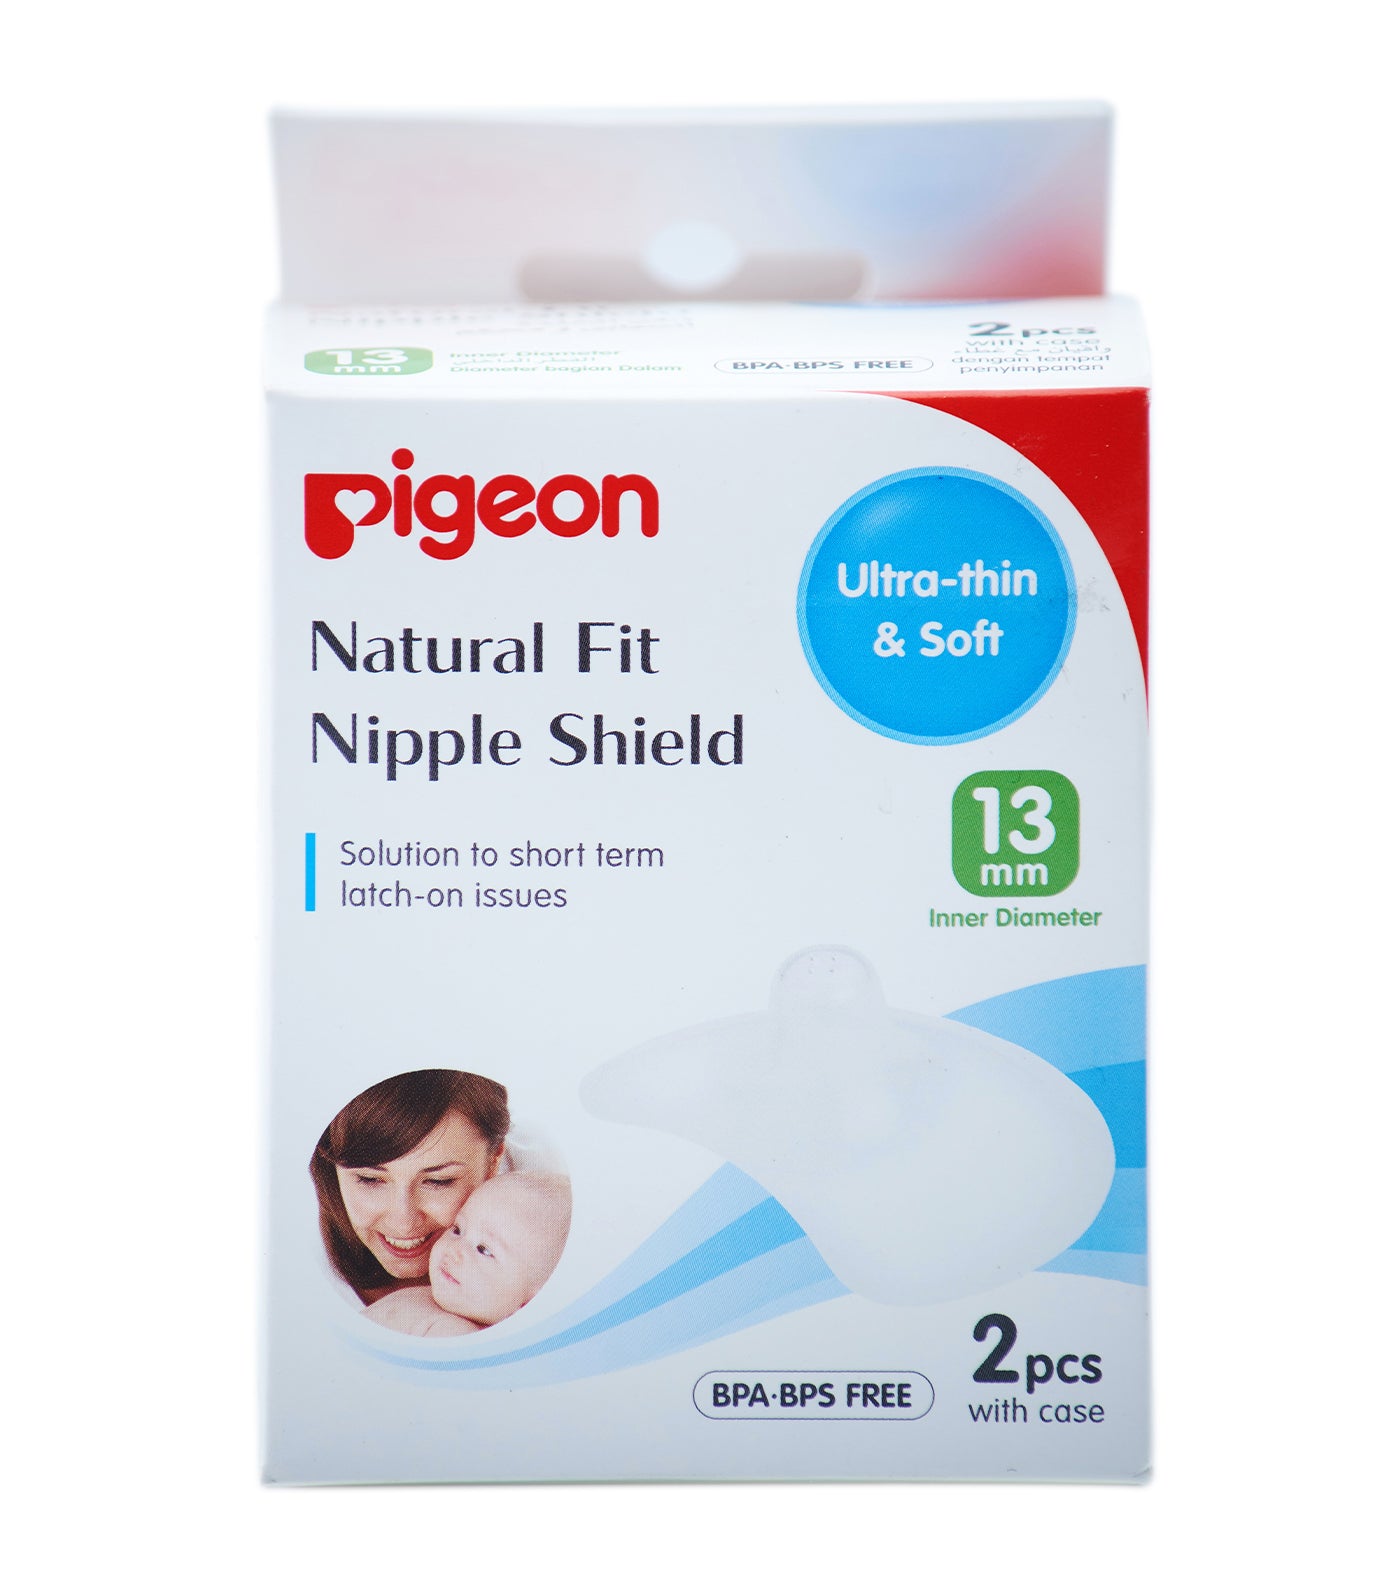 pigeon natural fit nipple shield 13 mm (2 pieces)